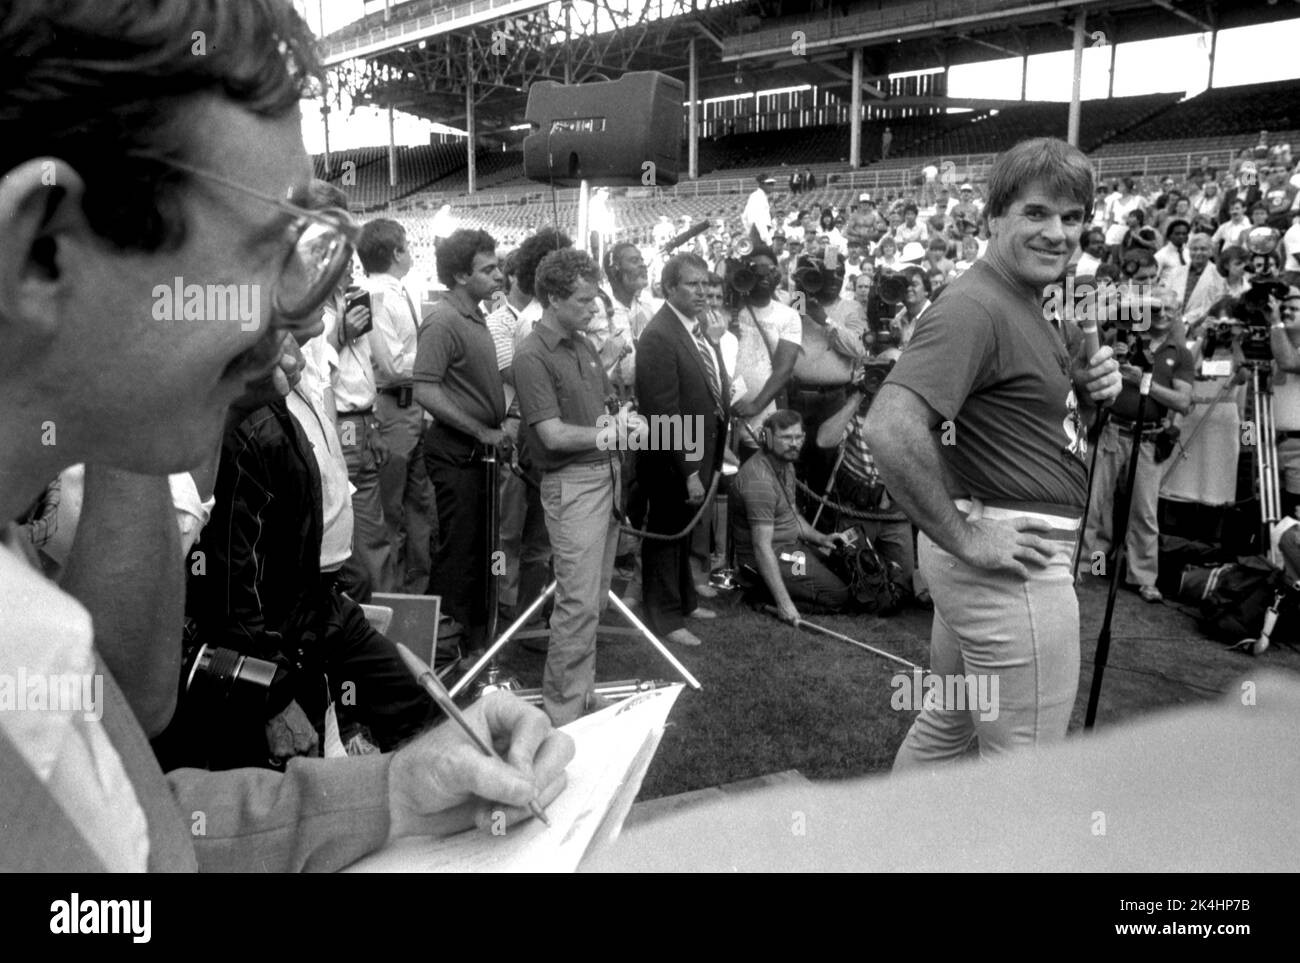 Pete Rose, player manager of the Cincinnati Reds, meets with the press before a game against the Chicago Cubs at Wrigley Field,   ca. 1985 Stock Photo